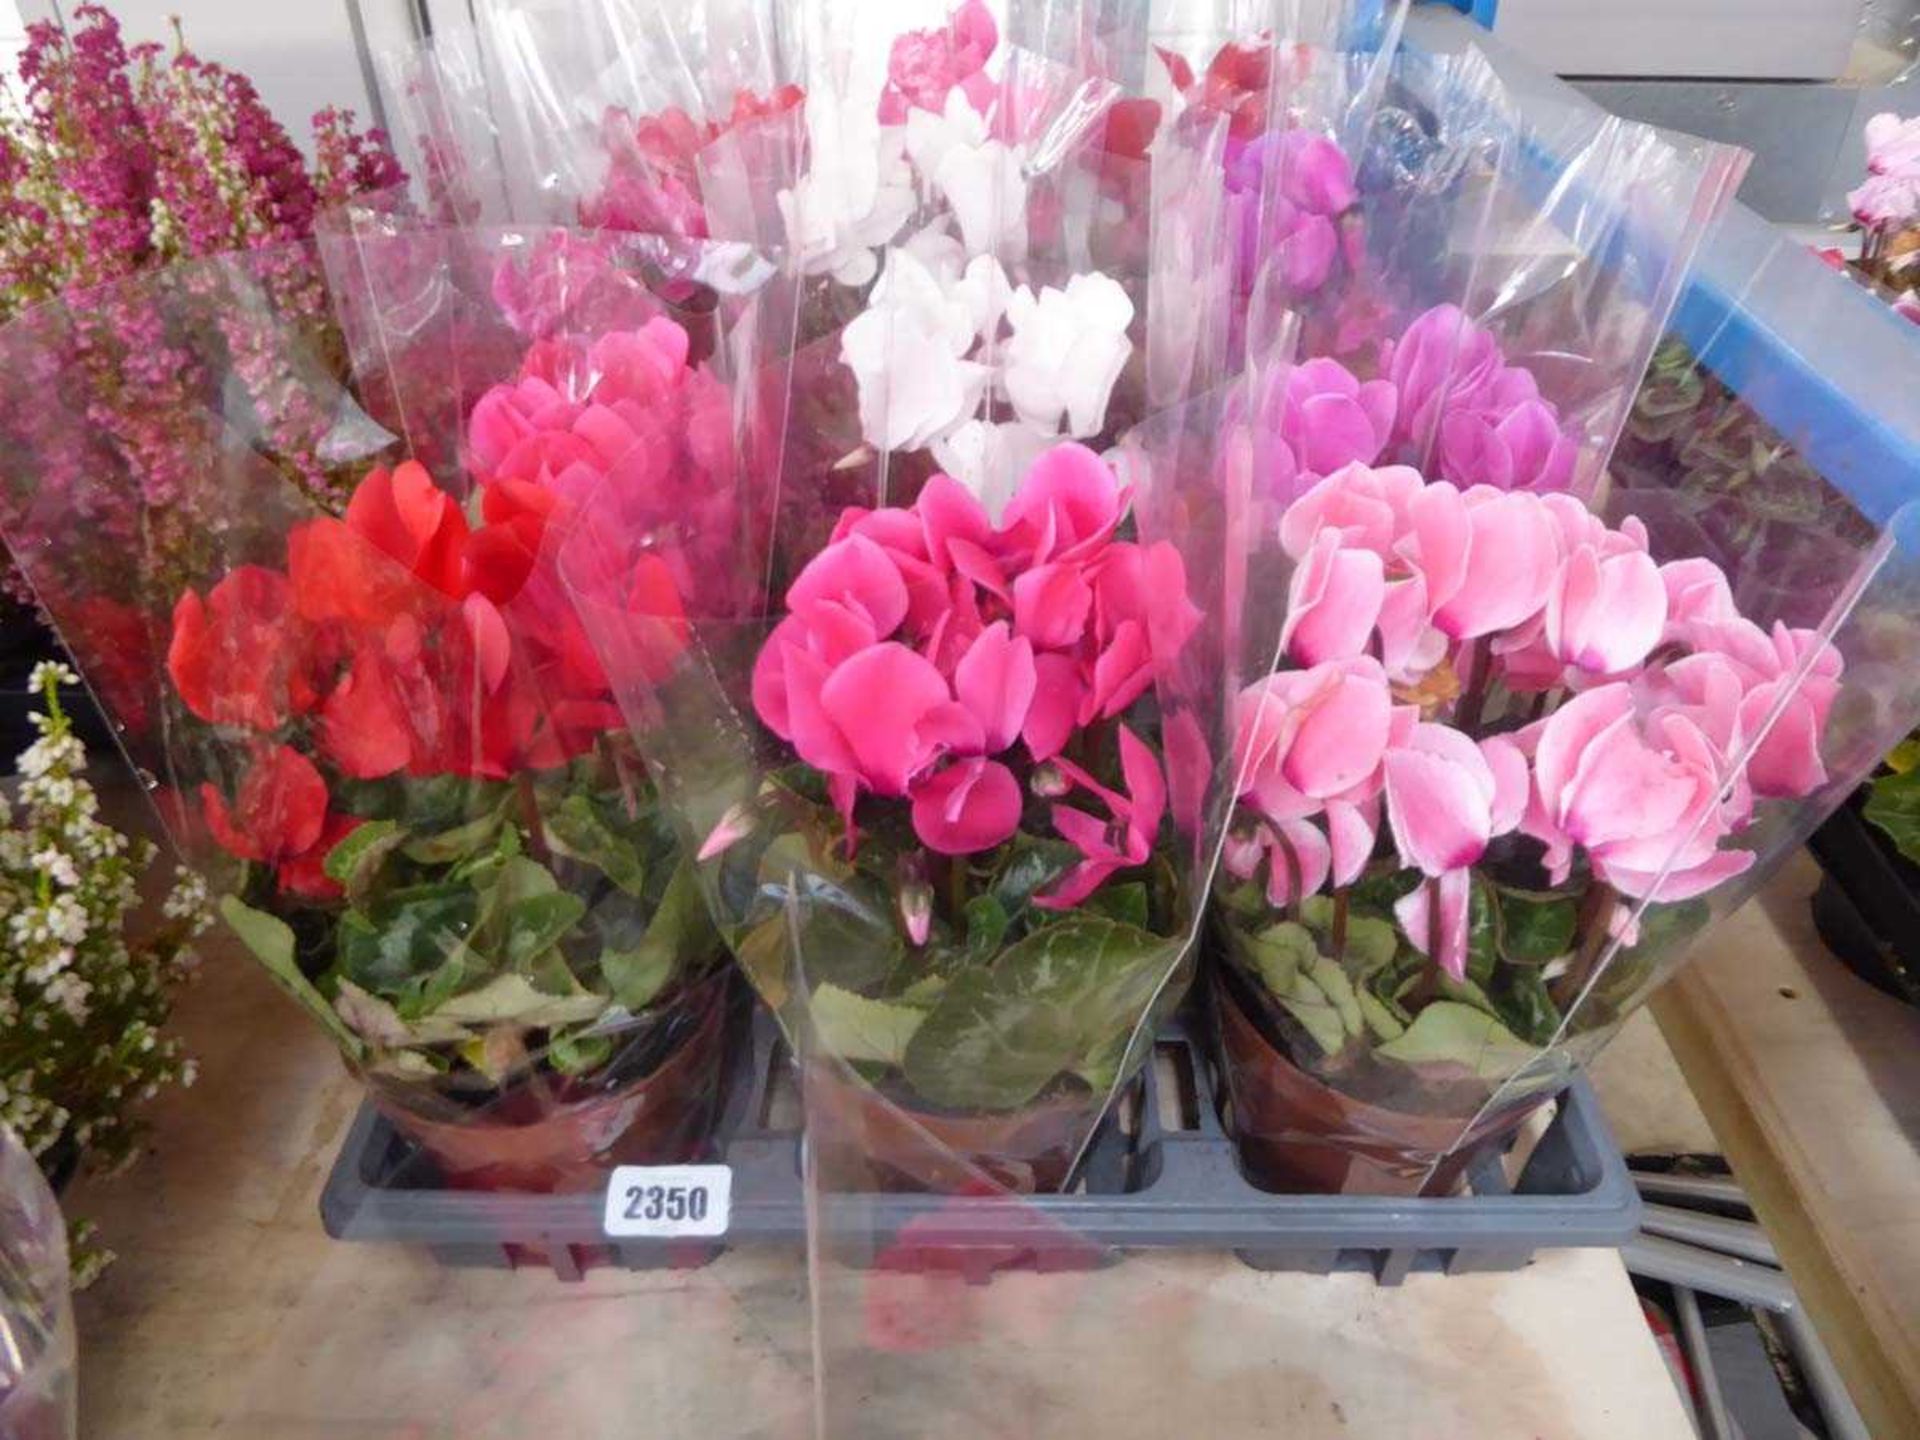 Tray containing 6 large cyclamens in sheaves